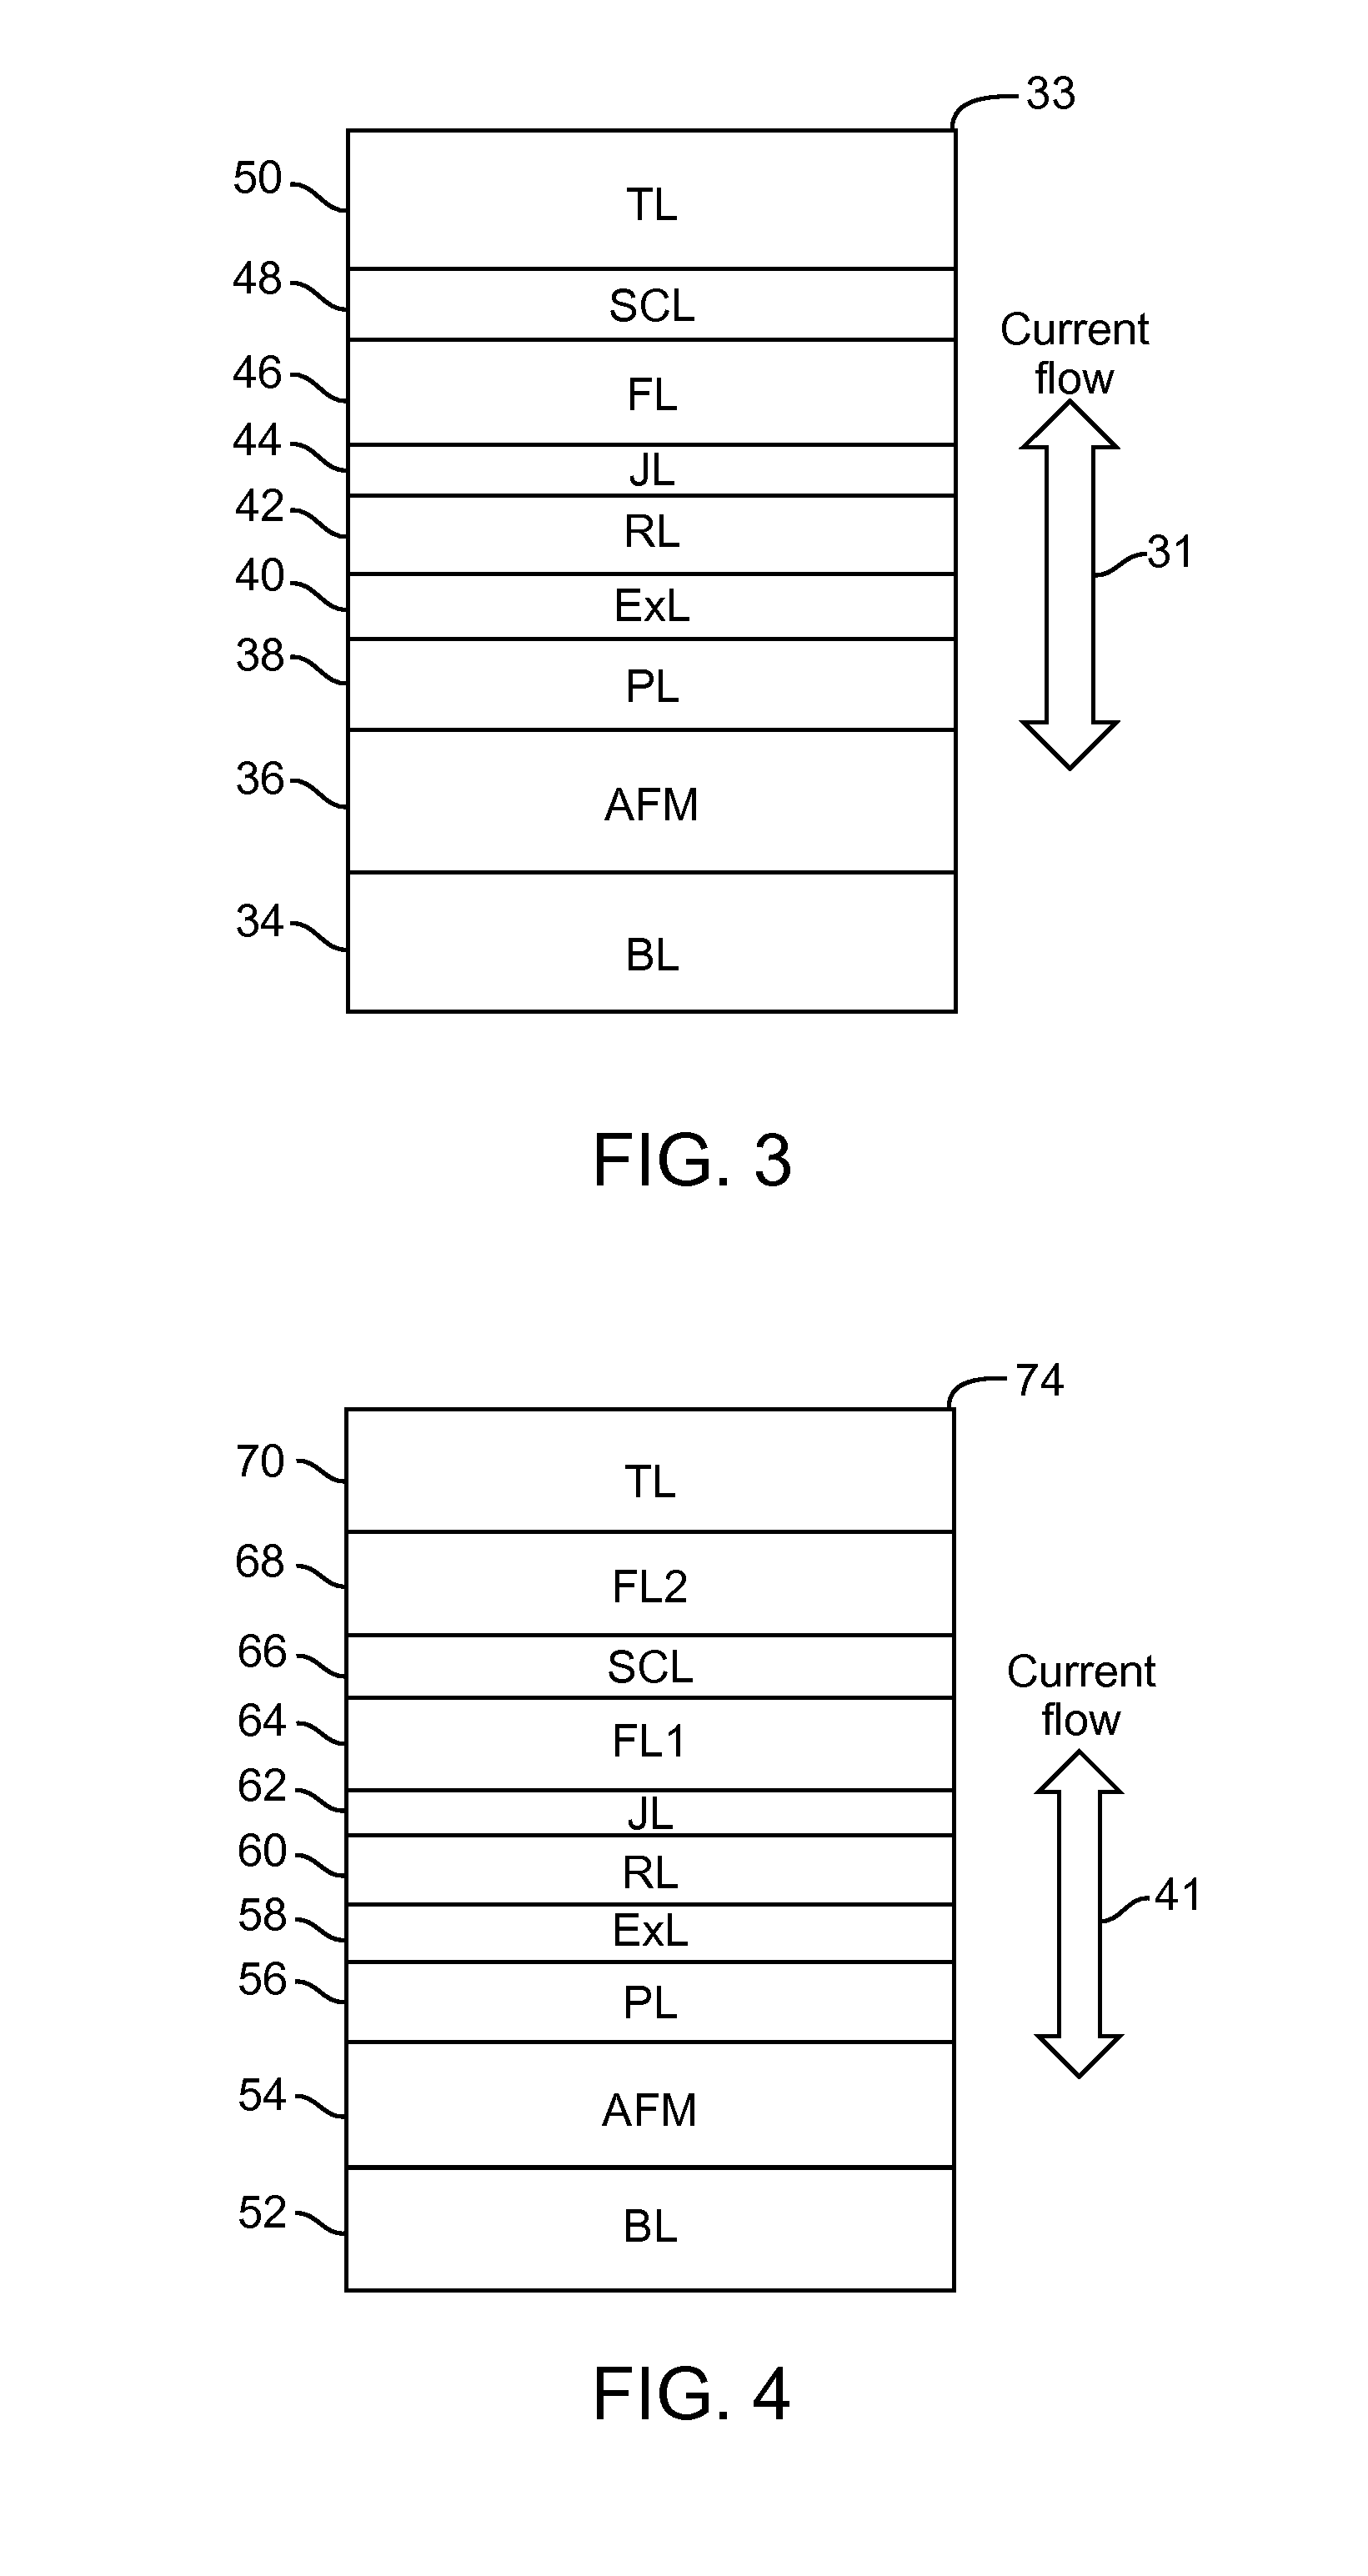 Magnetic Tunnel Junction With Non-Metallic Layer Adjacent to Free Layer